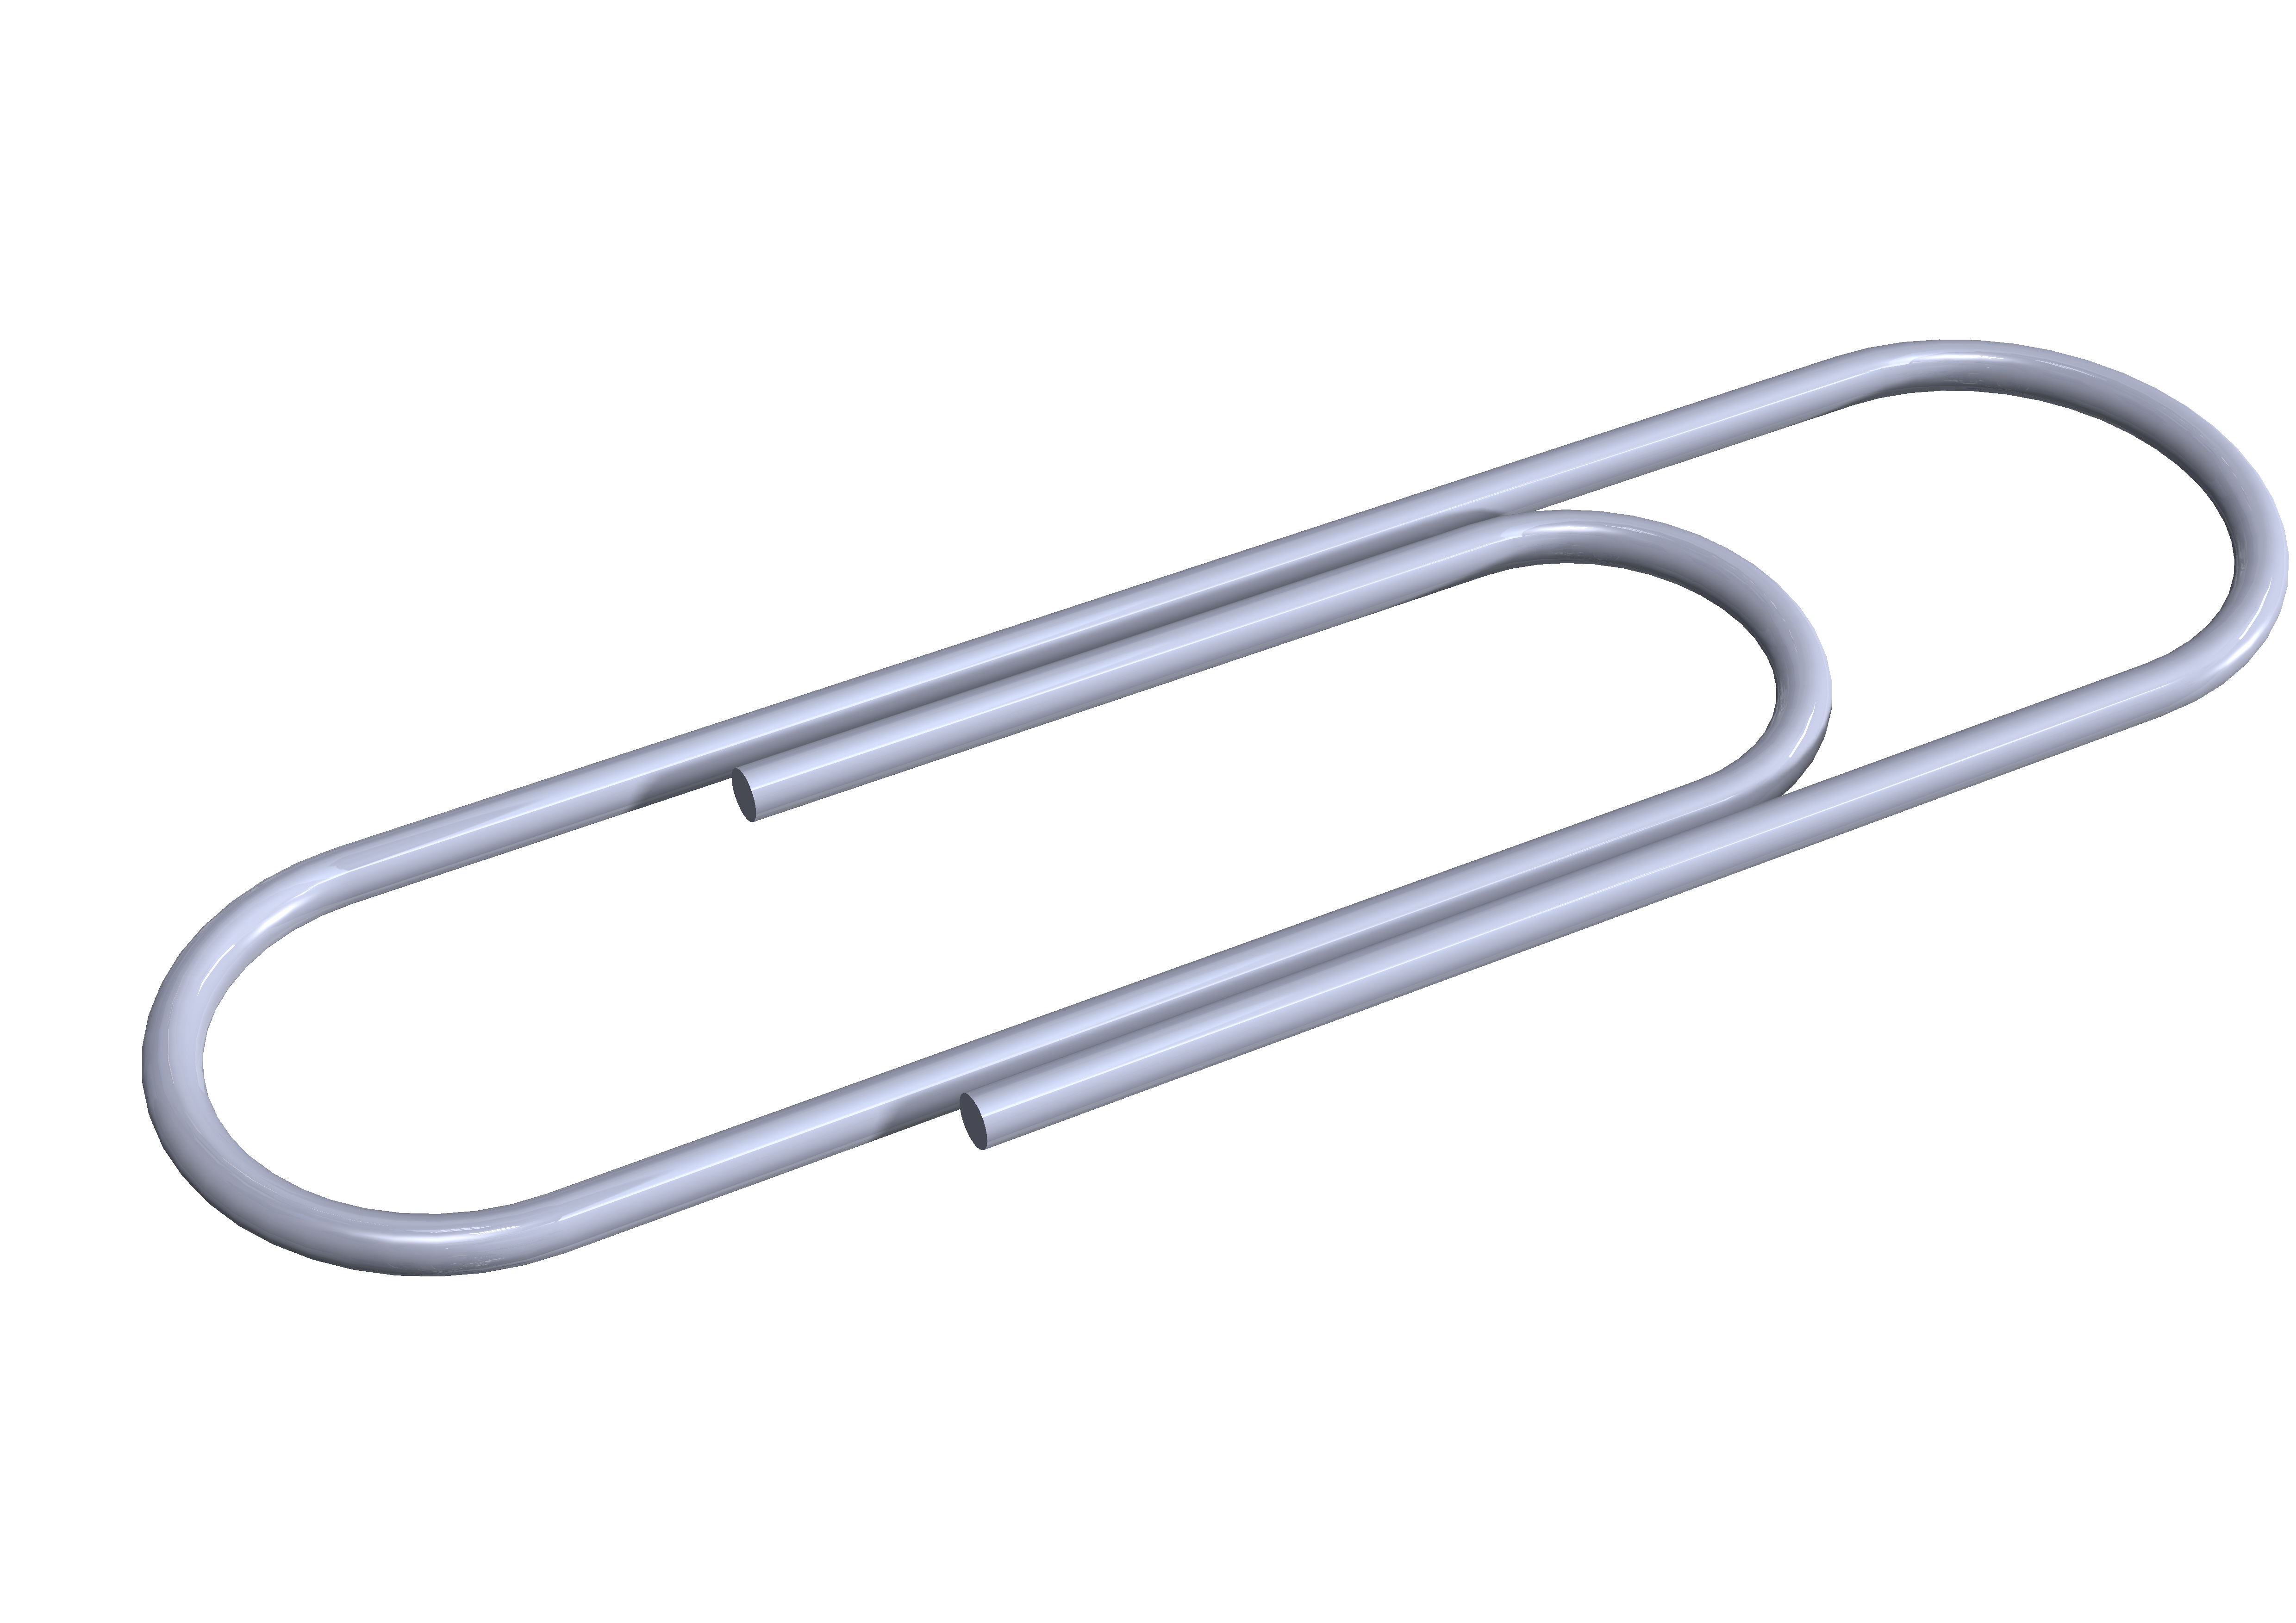 SolidWorks Paperclip Tutorial | LearnSolidWorks.